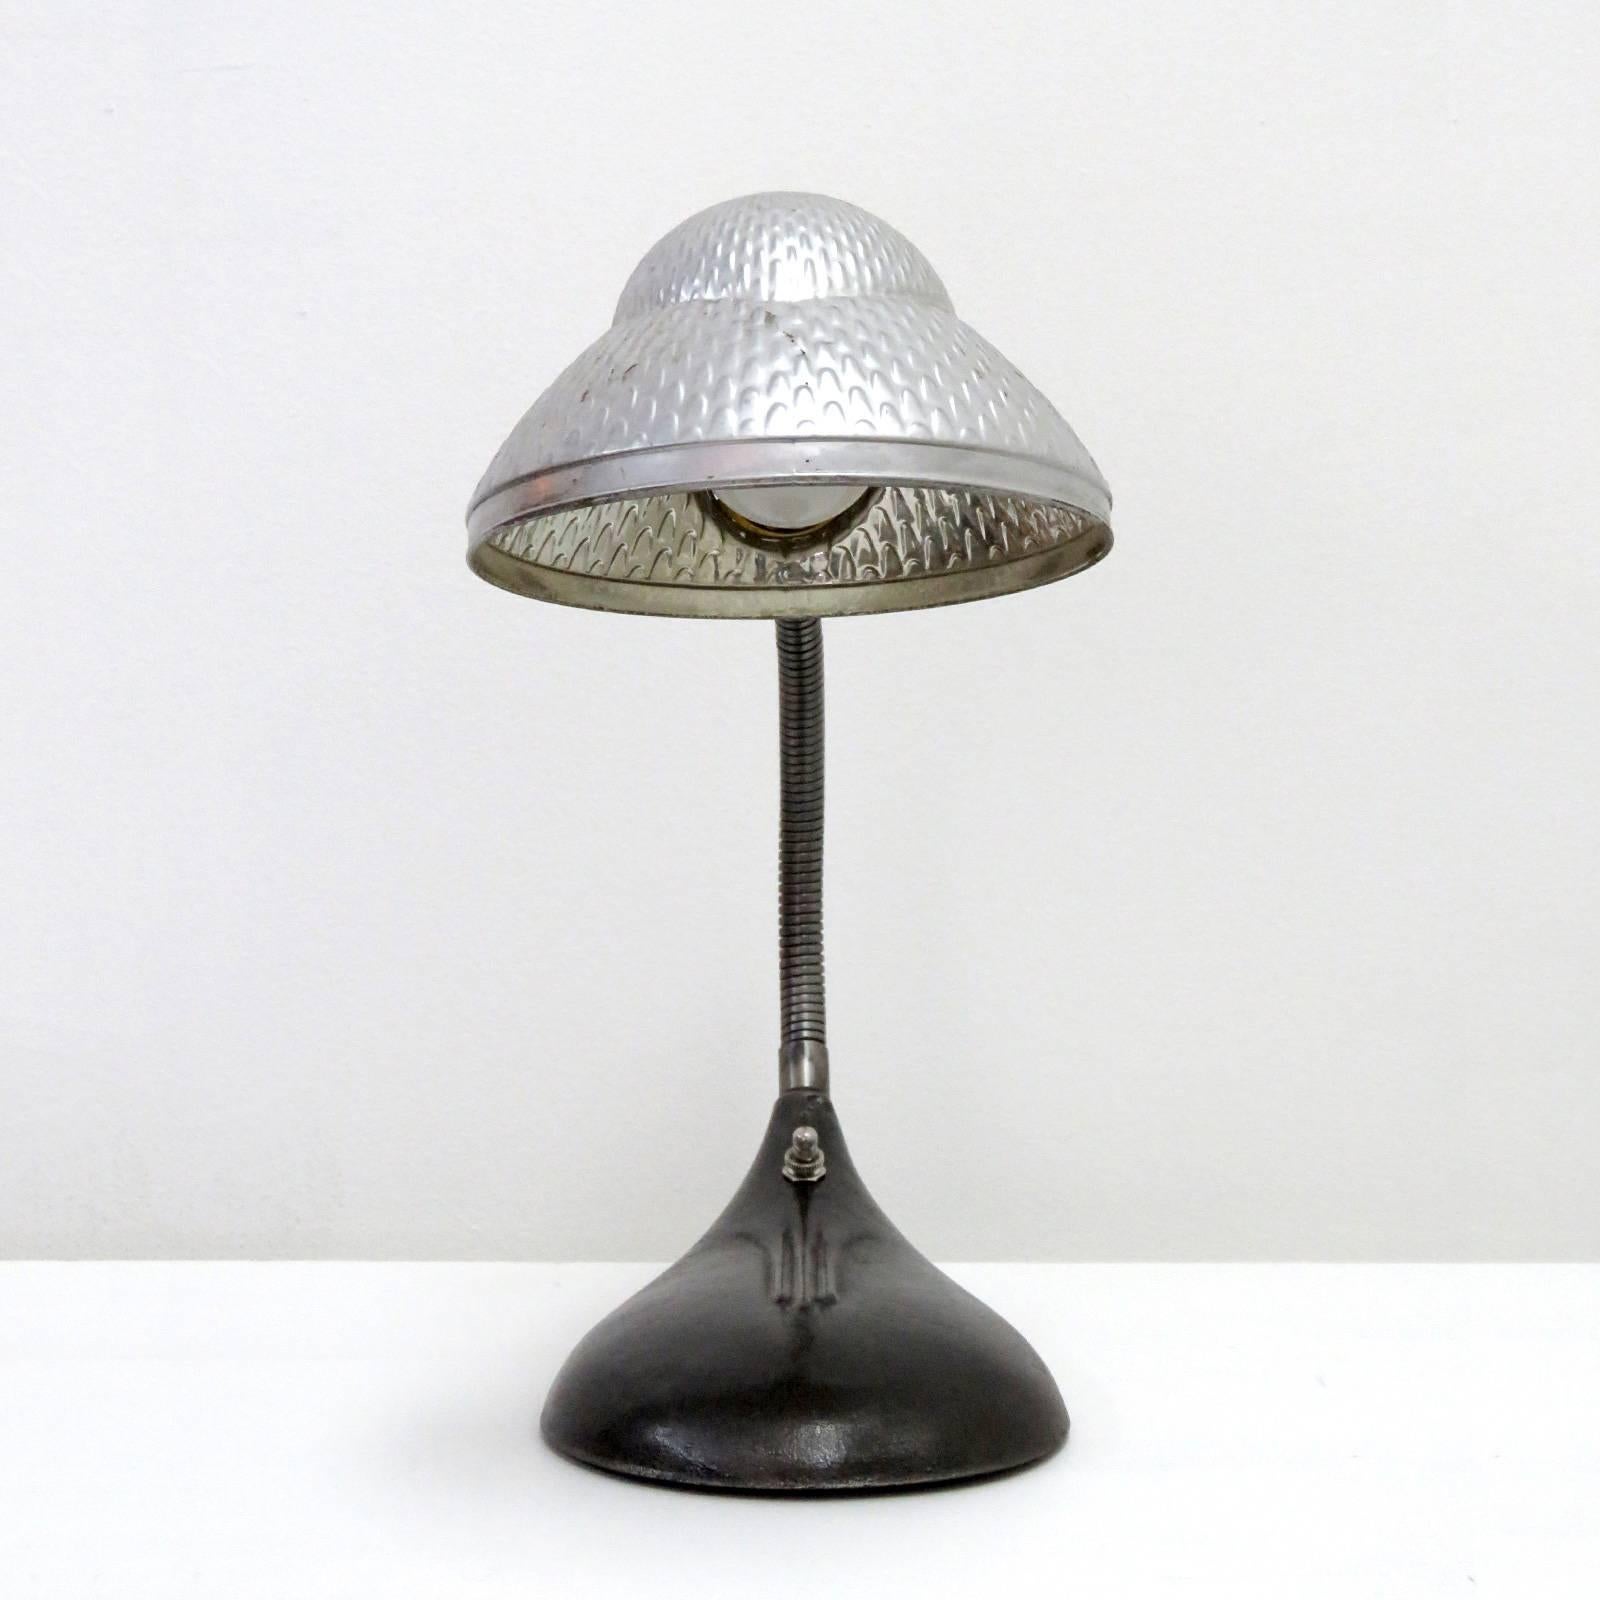 Cast Industrial Table Lamp with Mercury Glass Shade